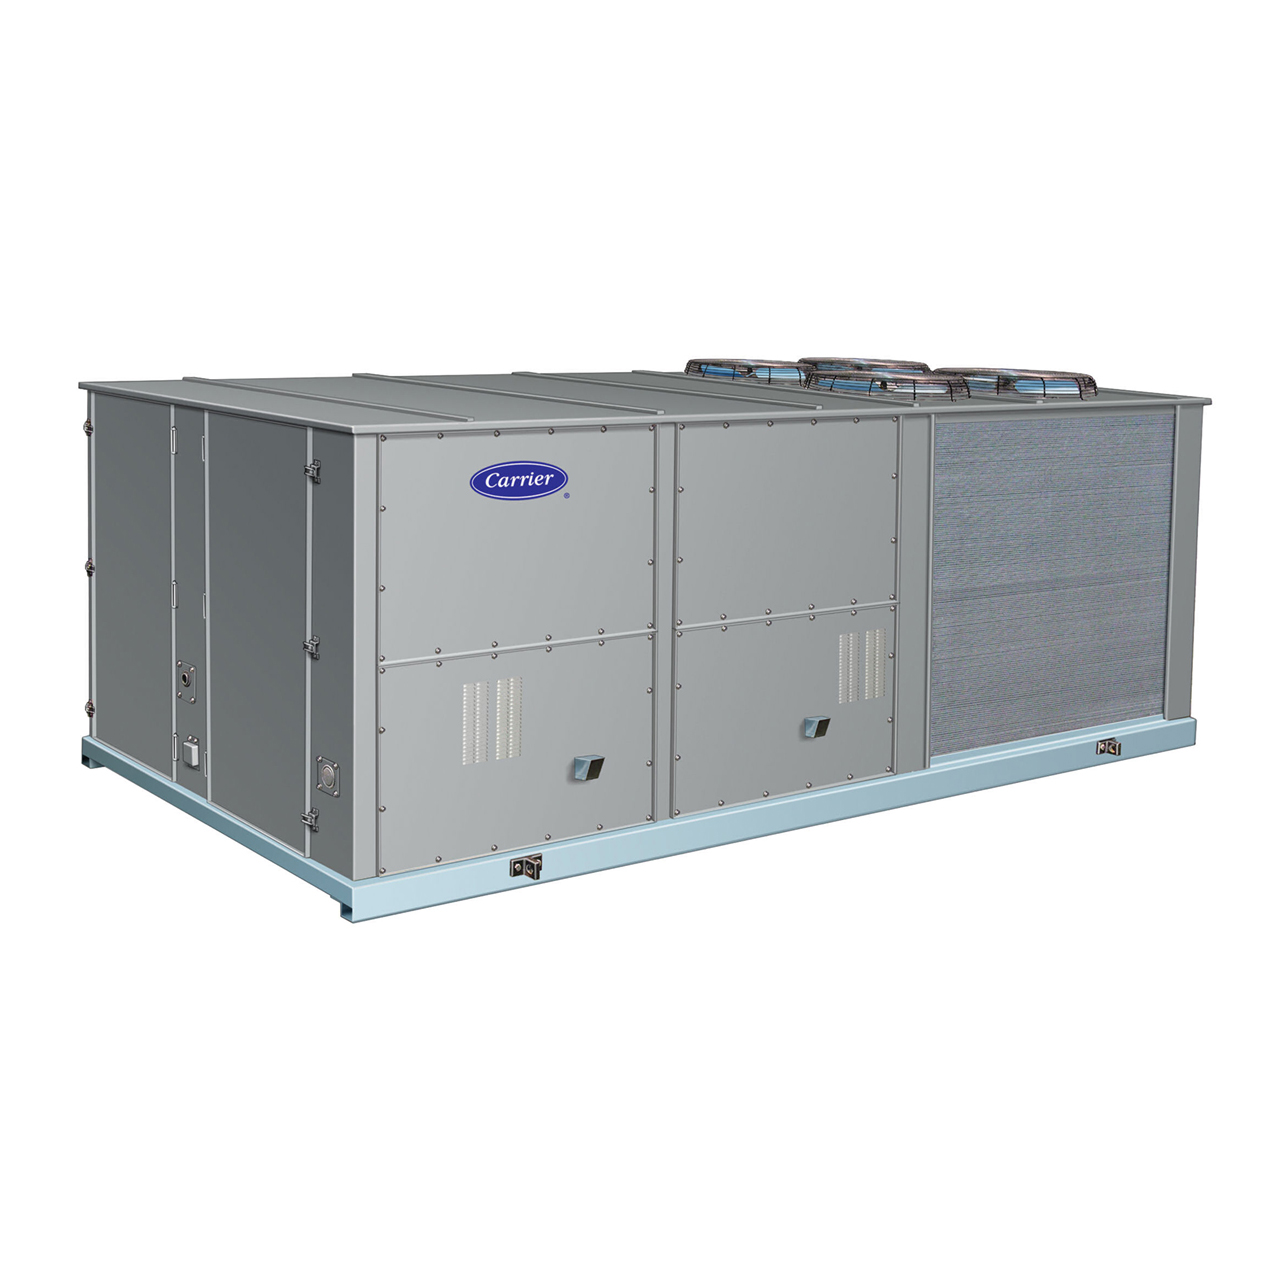 Units are available in Constant Volume (CV), Staged Air Volume (SAV), or Variable Air Volume (VAV) applications. 